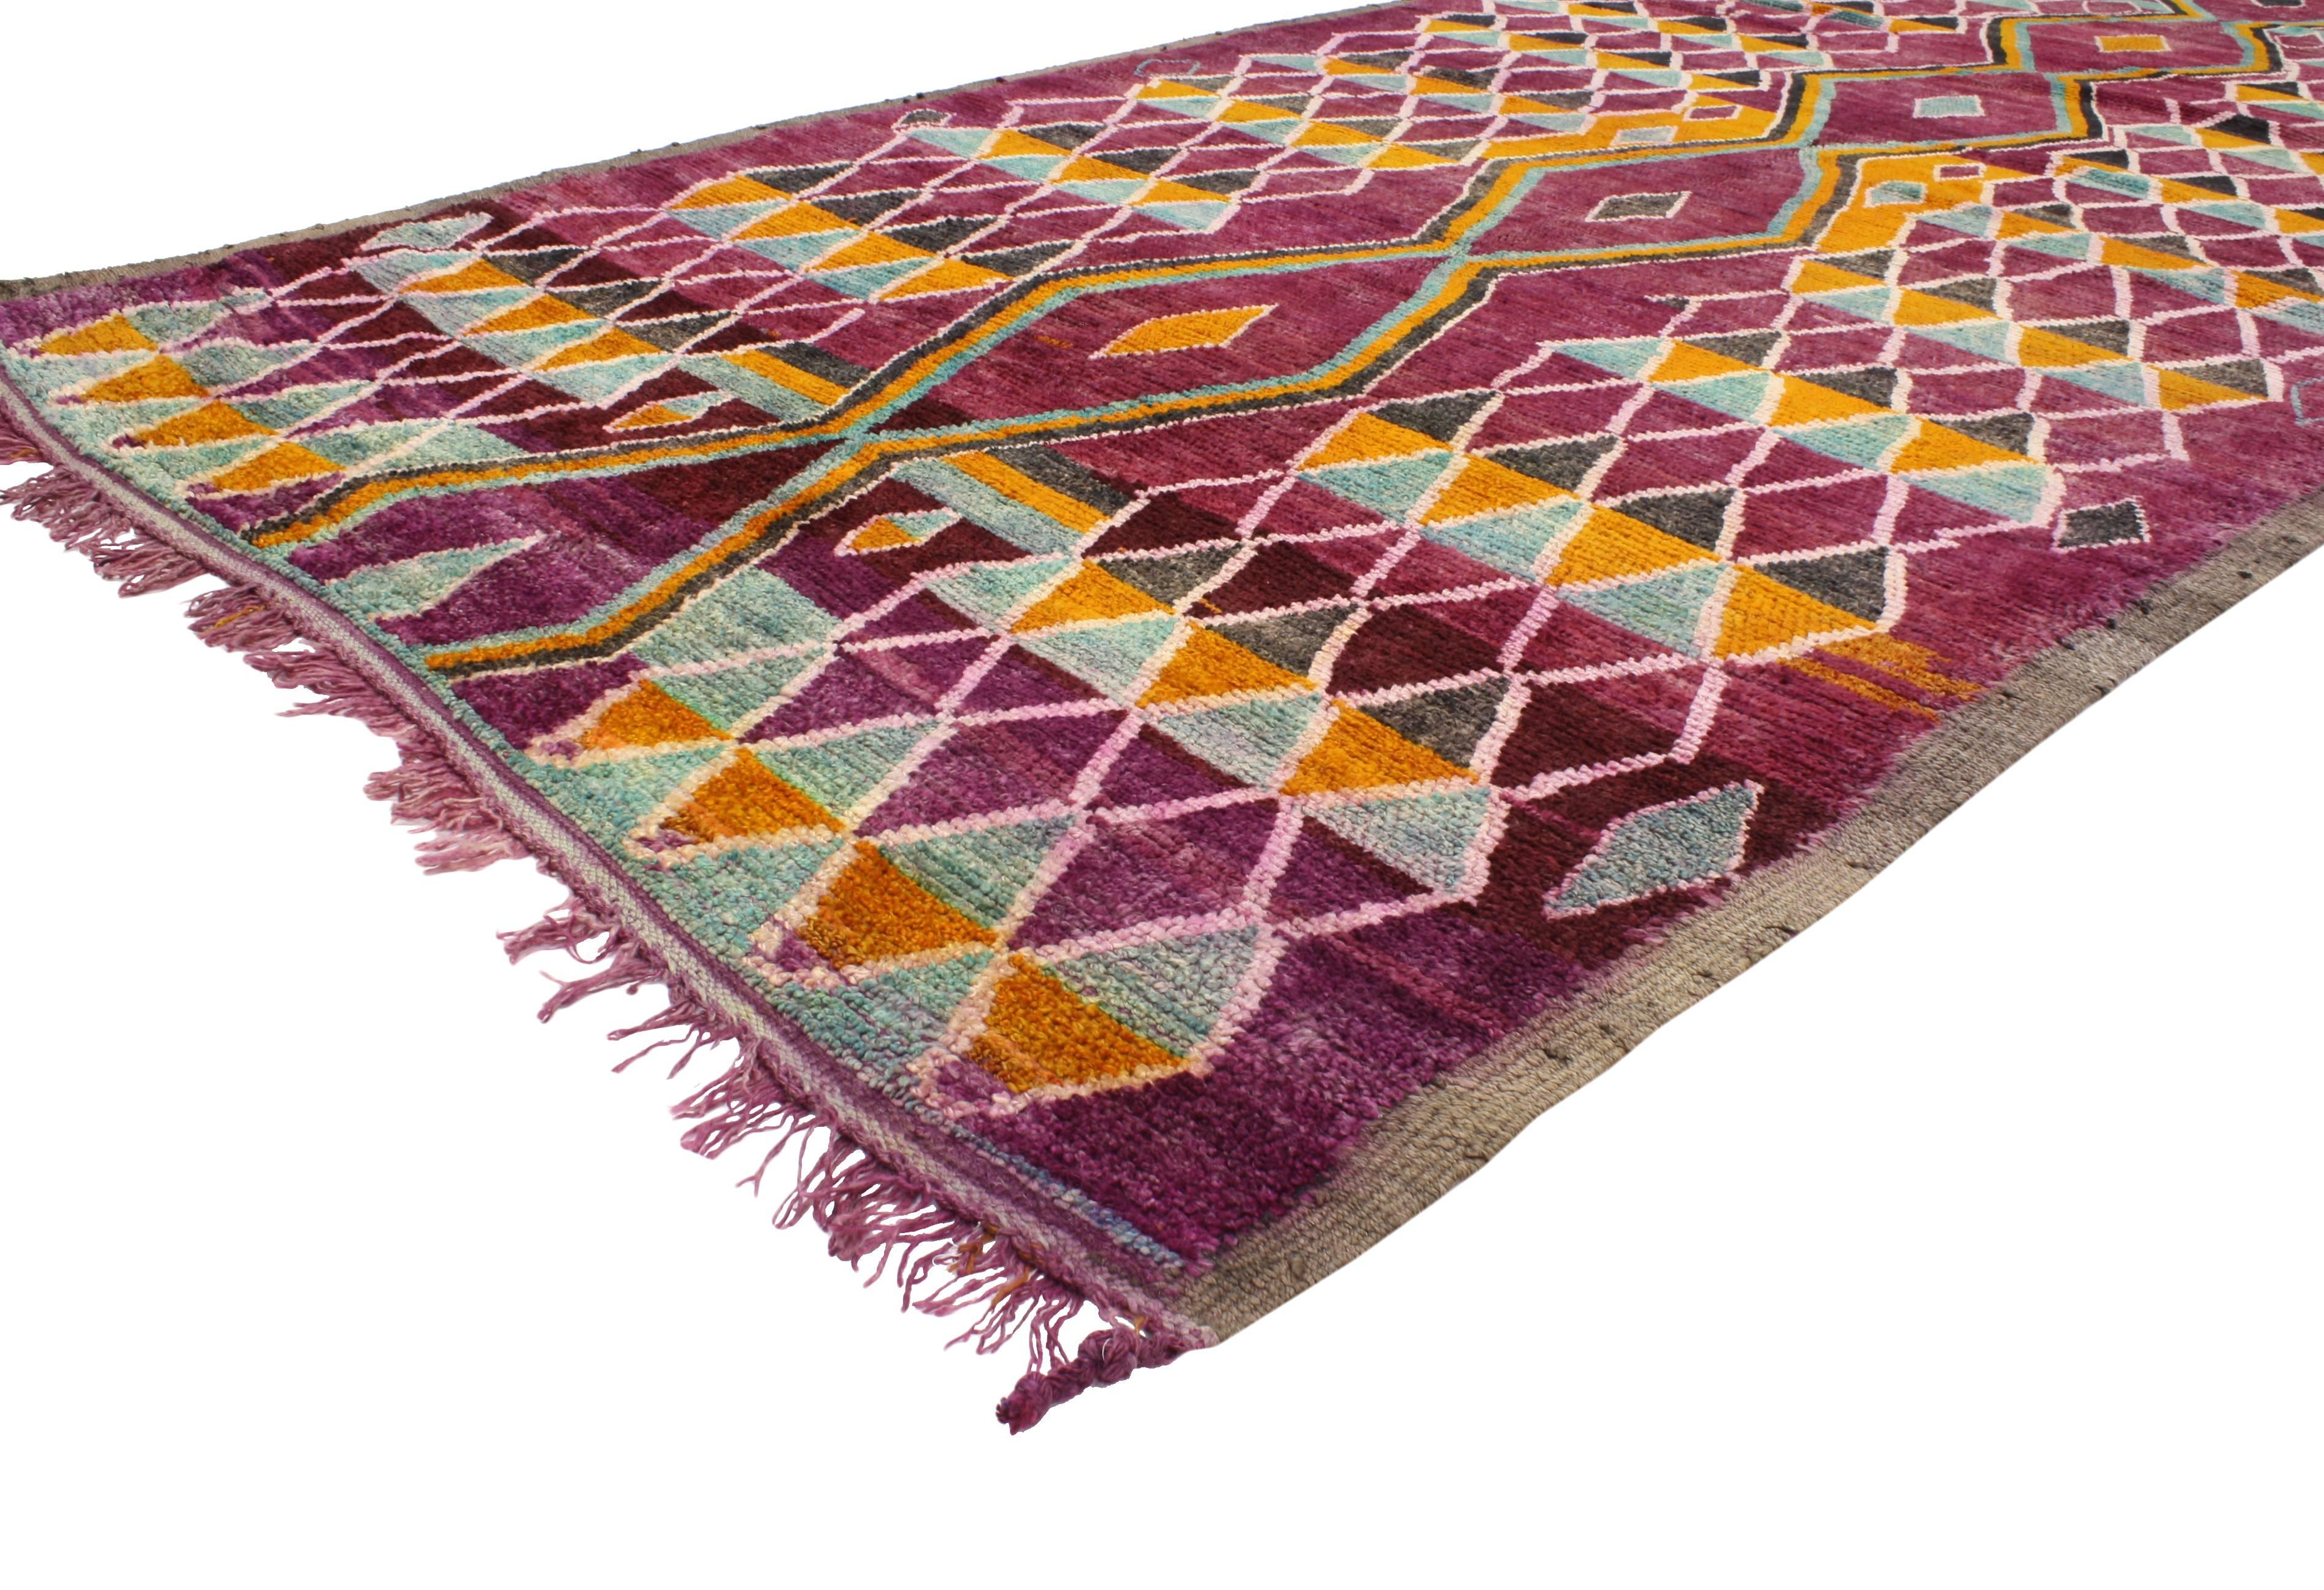 20410 Raspberry Vintage Berber Moroccan Rug with Modern Tribal Style. Saturated with good taste and modern tribal style, this vintage Berber Moroccan rug swathed in variegated shades of raspberry, orange, teal and charcoal. This fashion-forward